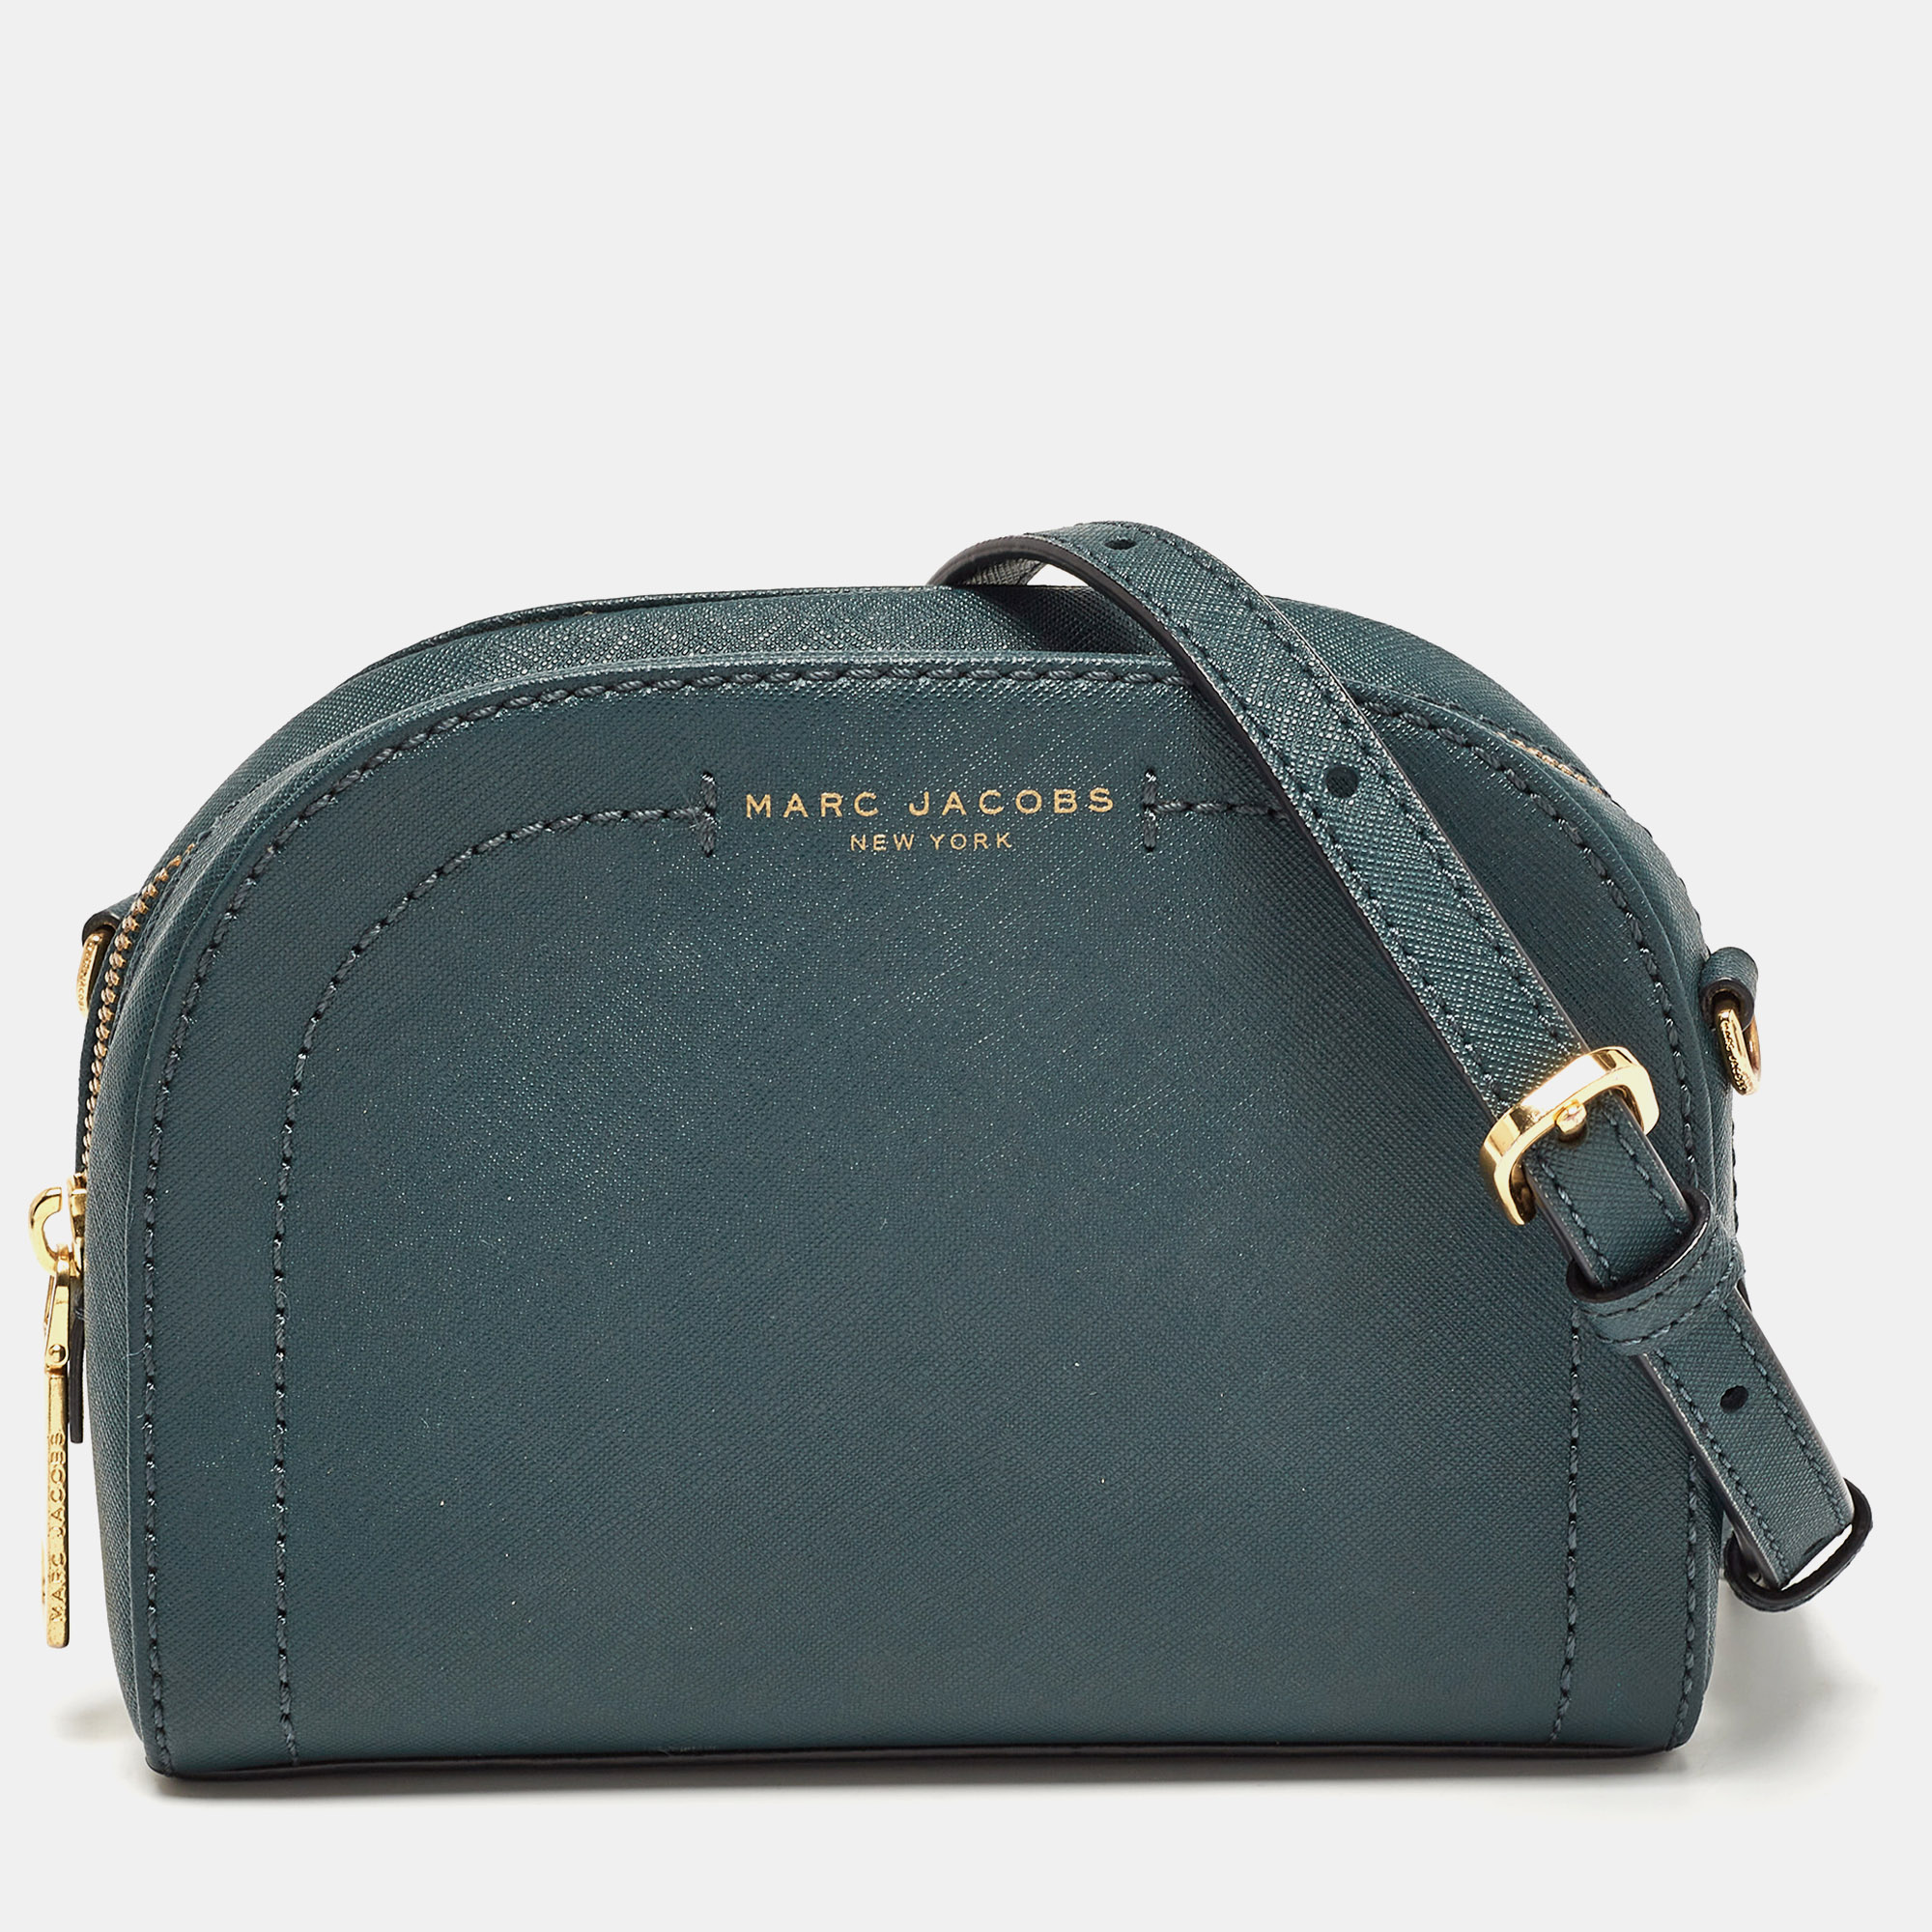 Marc jacobs dark green leather playback dome crossbody bag